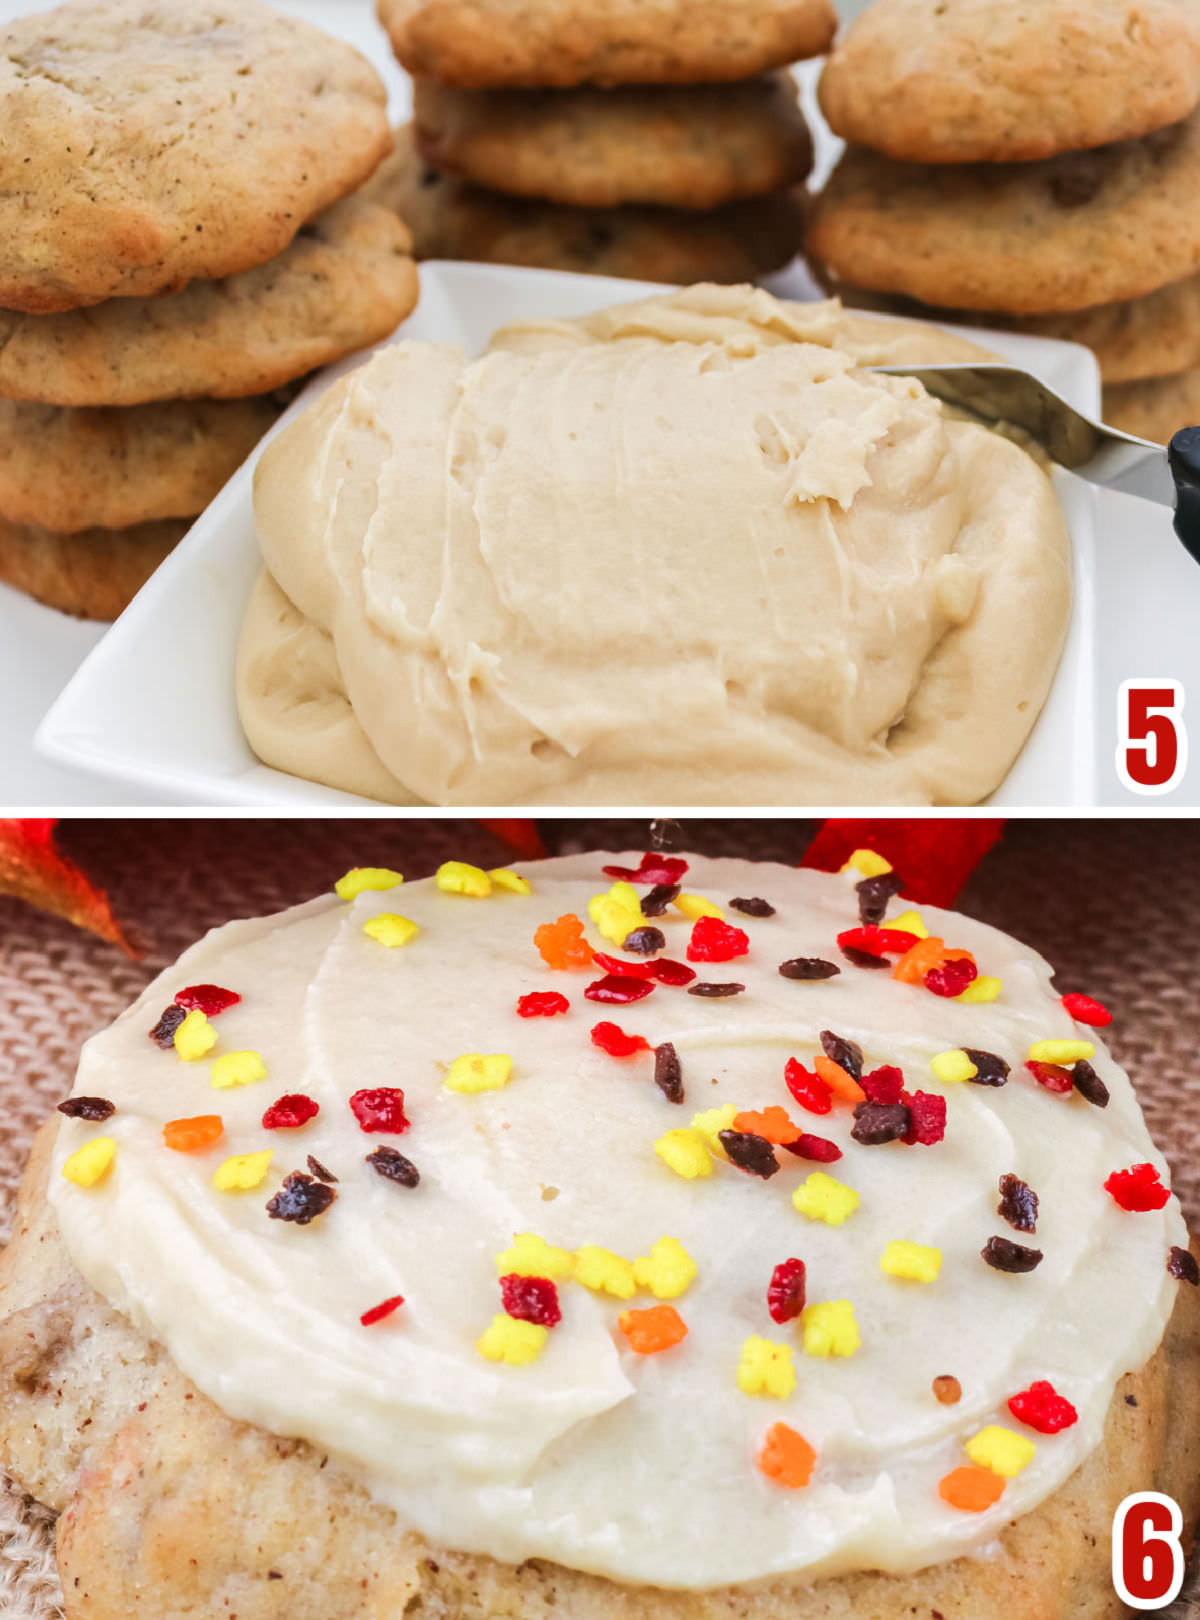 Collage image showing the steps for frosting the Banana Cookies with the cream cheese frosting.